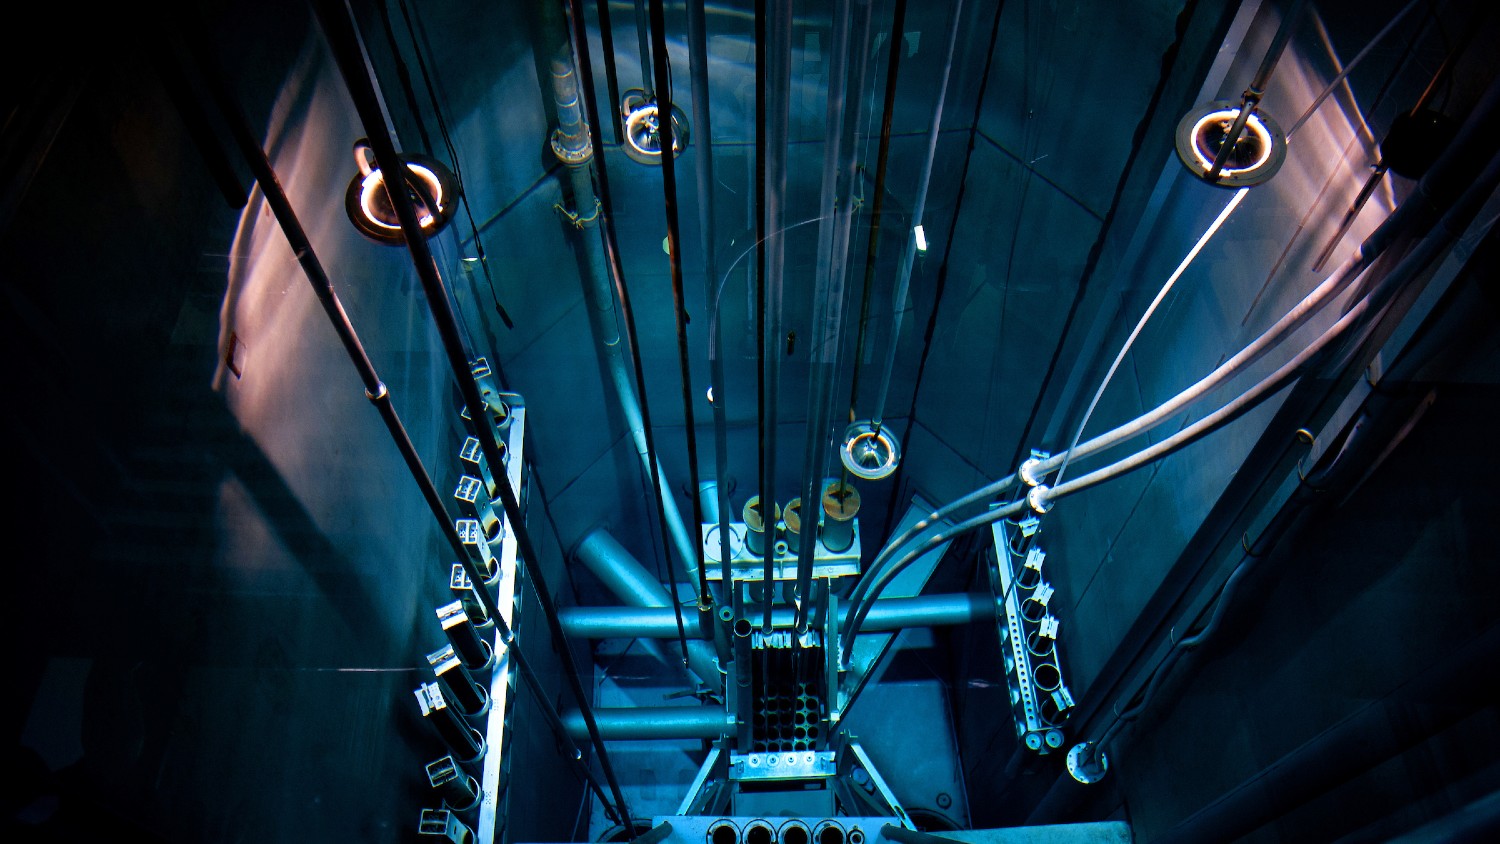 An overhead view looking down into the PULSTAR nuclear reactor lit in bluish light.